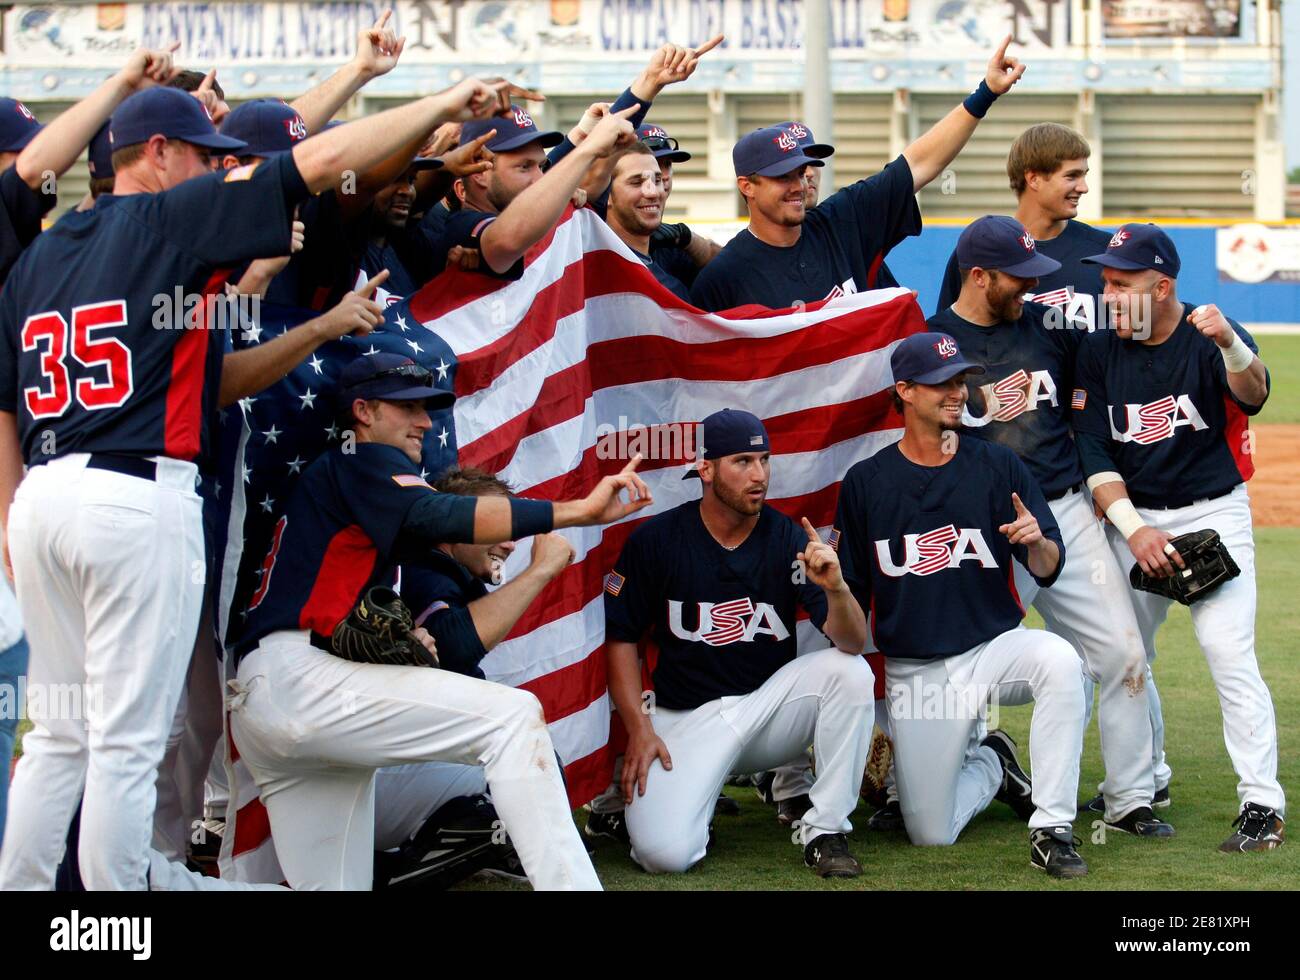 Members of the U.S. national baseball team pose with the national flag  after winning their IBAF World Cup 2009 baseball final game against Cuba at  the Steno Borghese Stadium in Nettuno, near